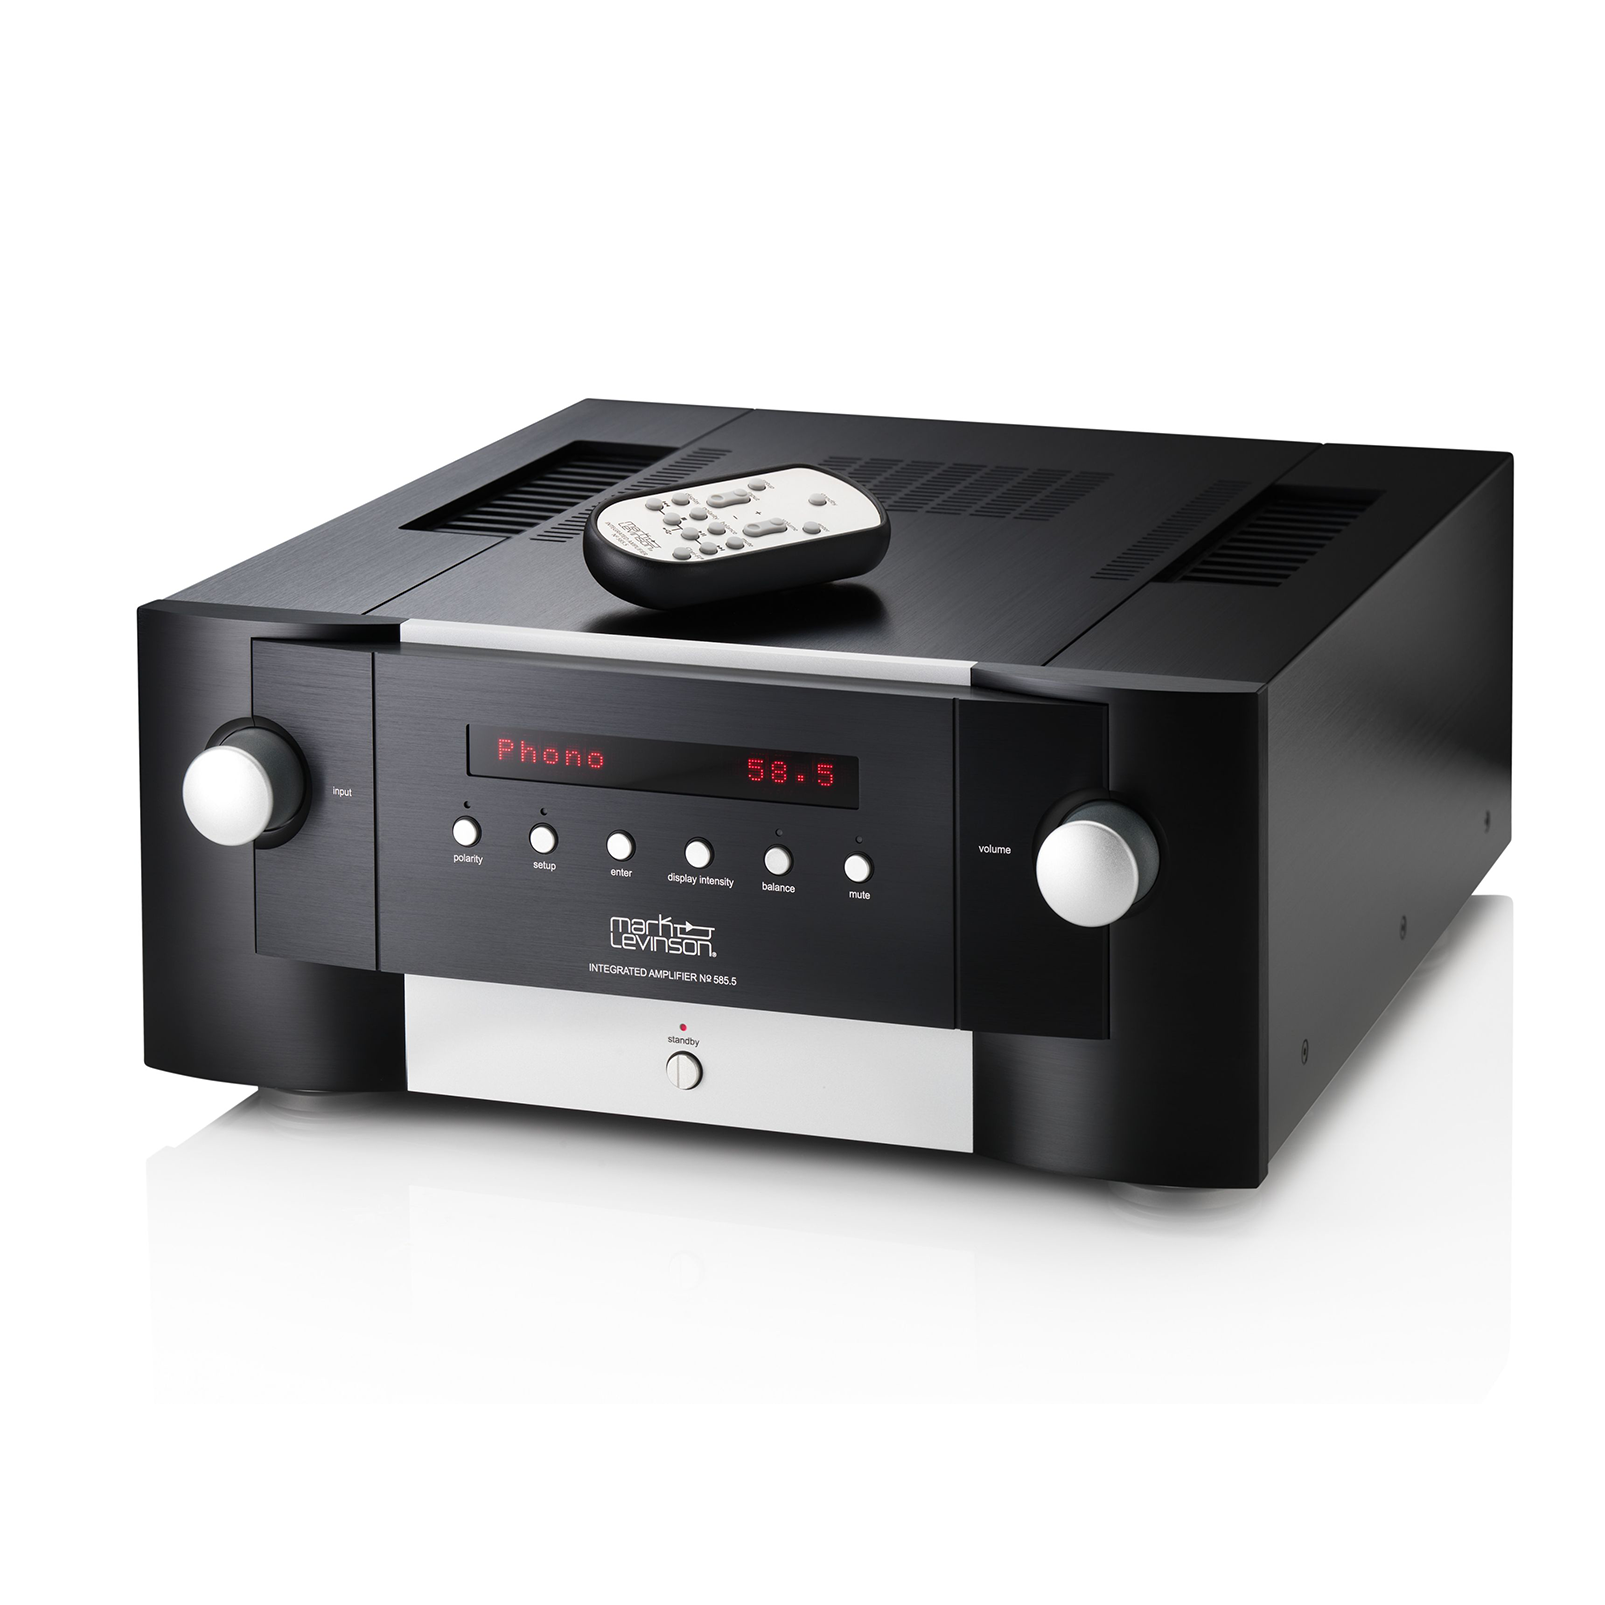 Nº585.5 - Black - Fully Discrete Integrated Amplifier with Class A Pure Phono Stage - Detailshot 1